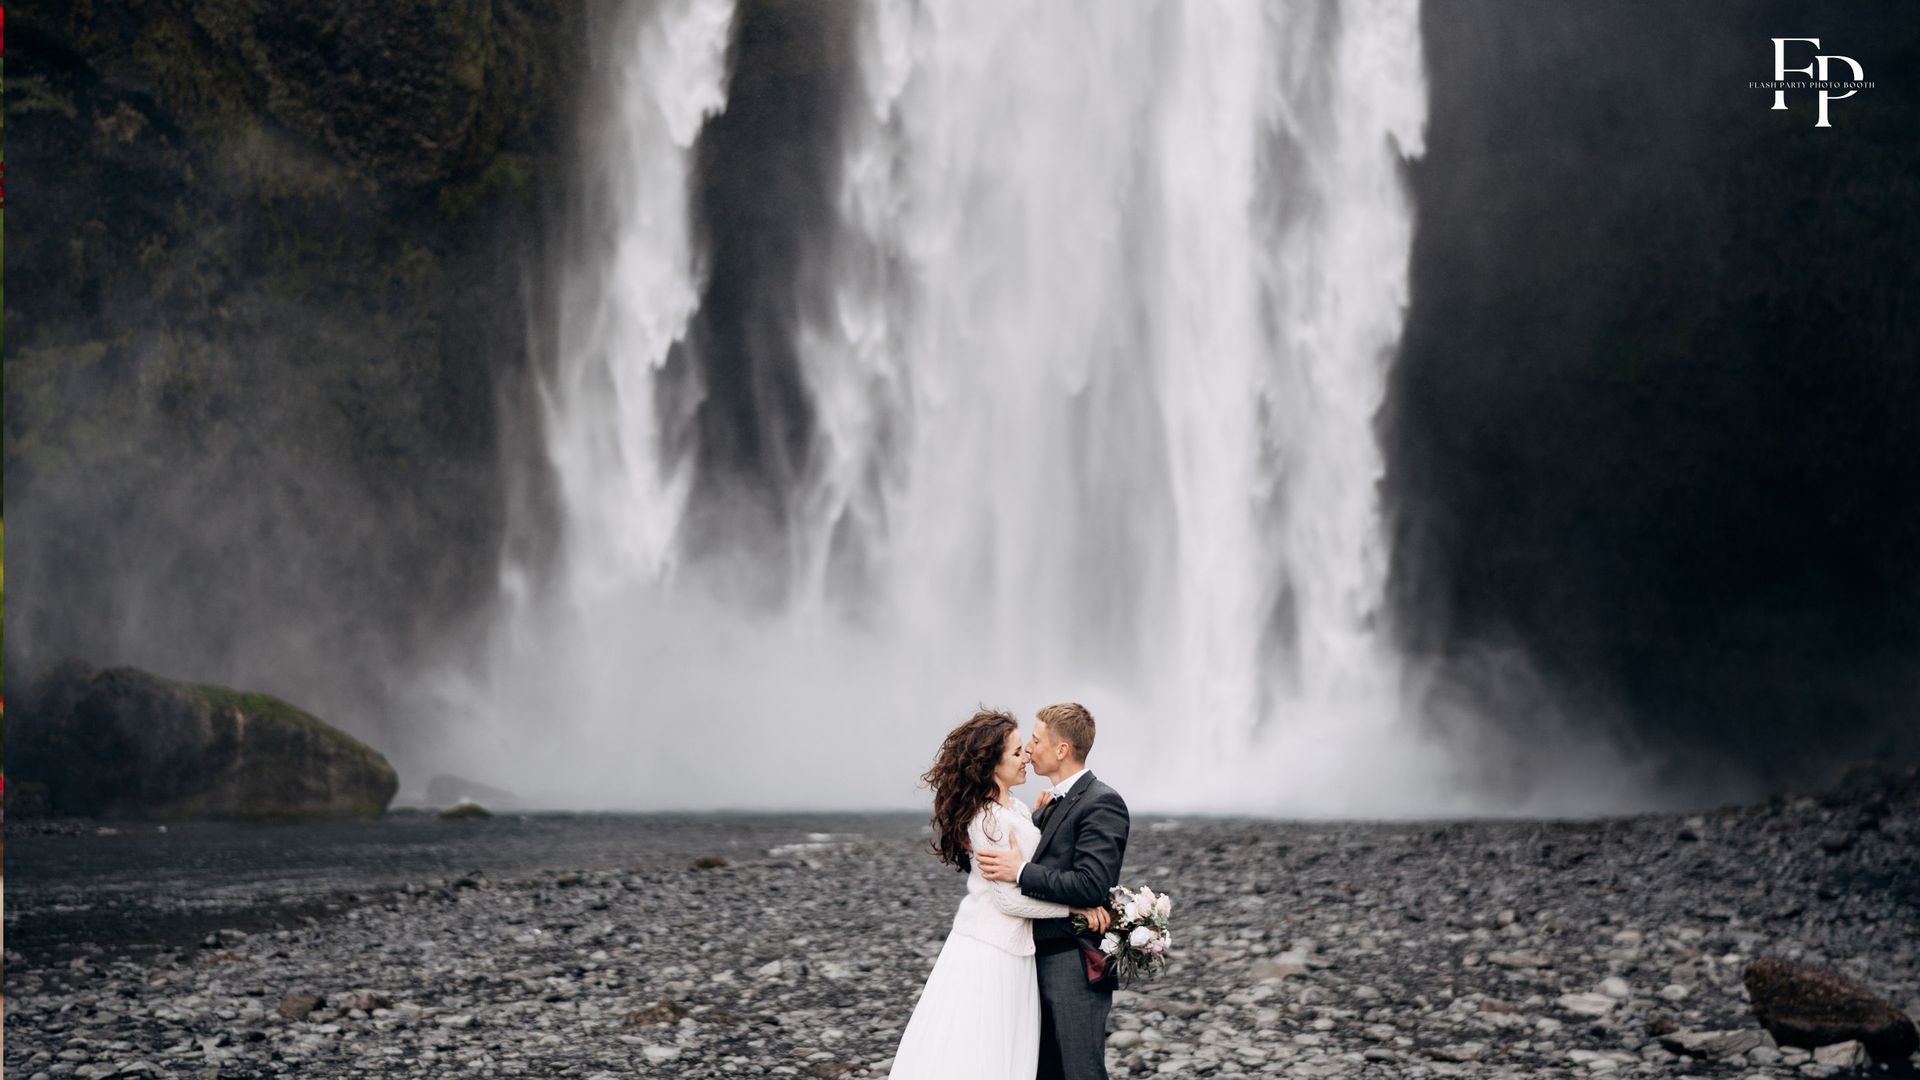 Couple embraces against the backdrop of a serene waterfall in Waco.